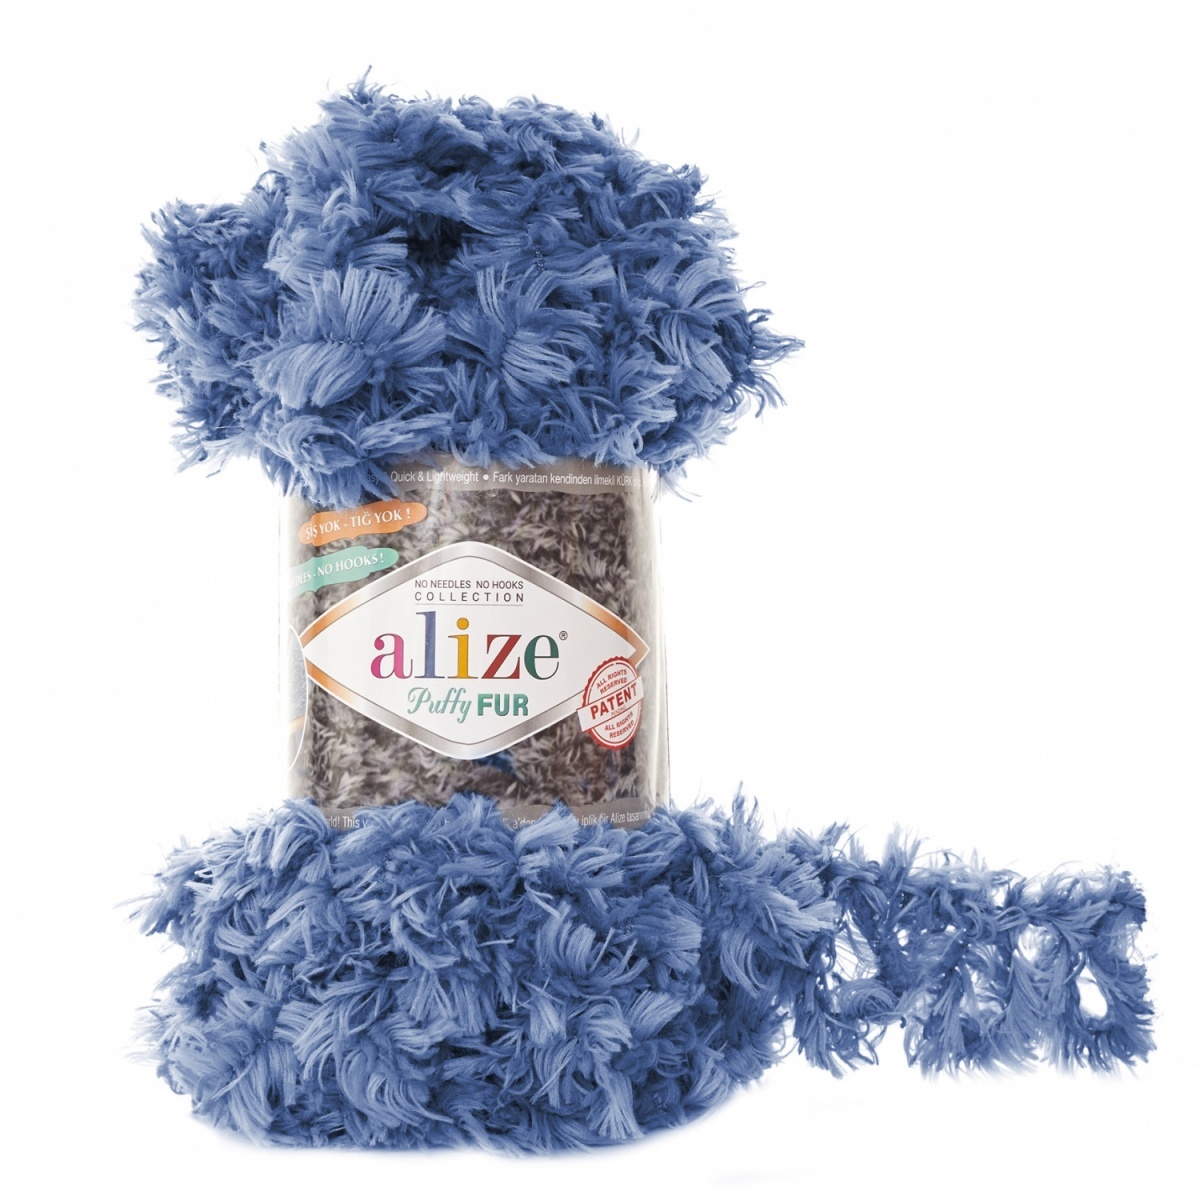 Alize Puffy Fur, 100% Polyester 5 Skein Value Pack, 500g фото 13